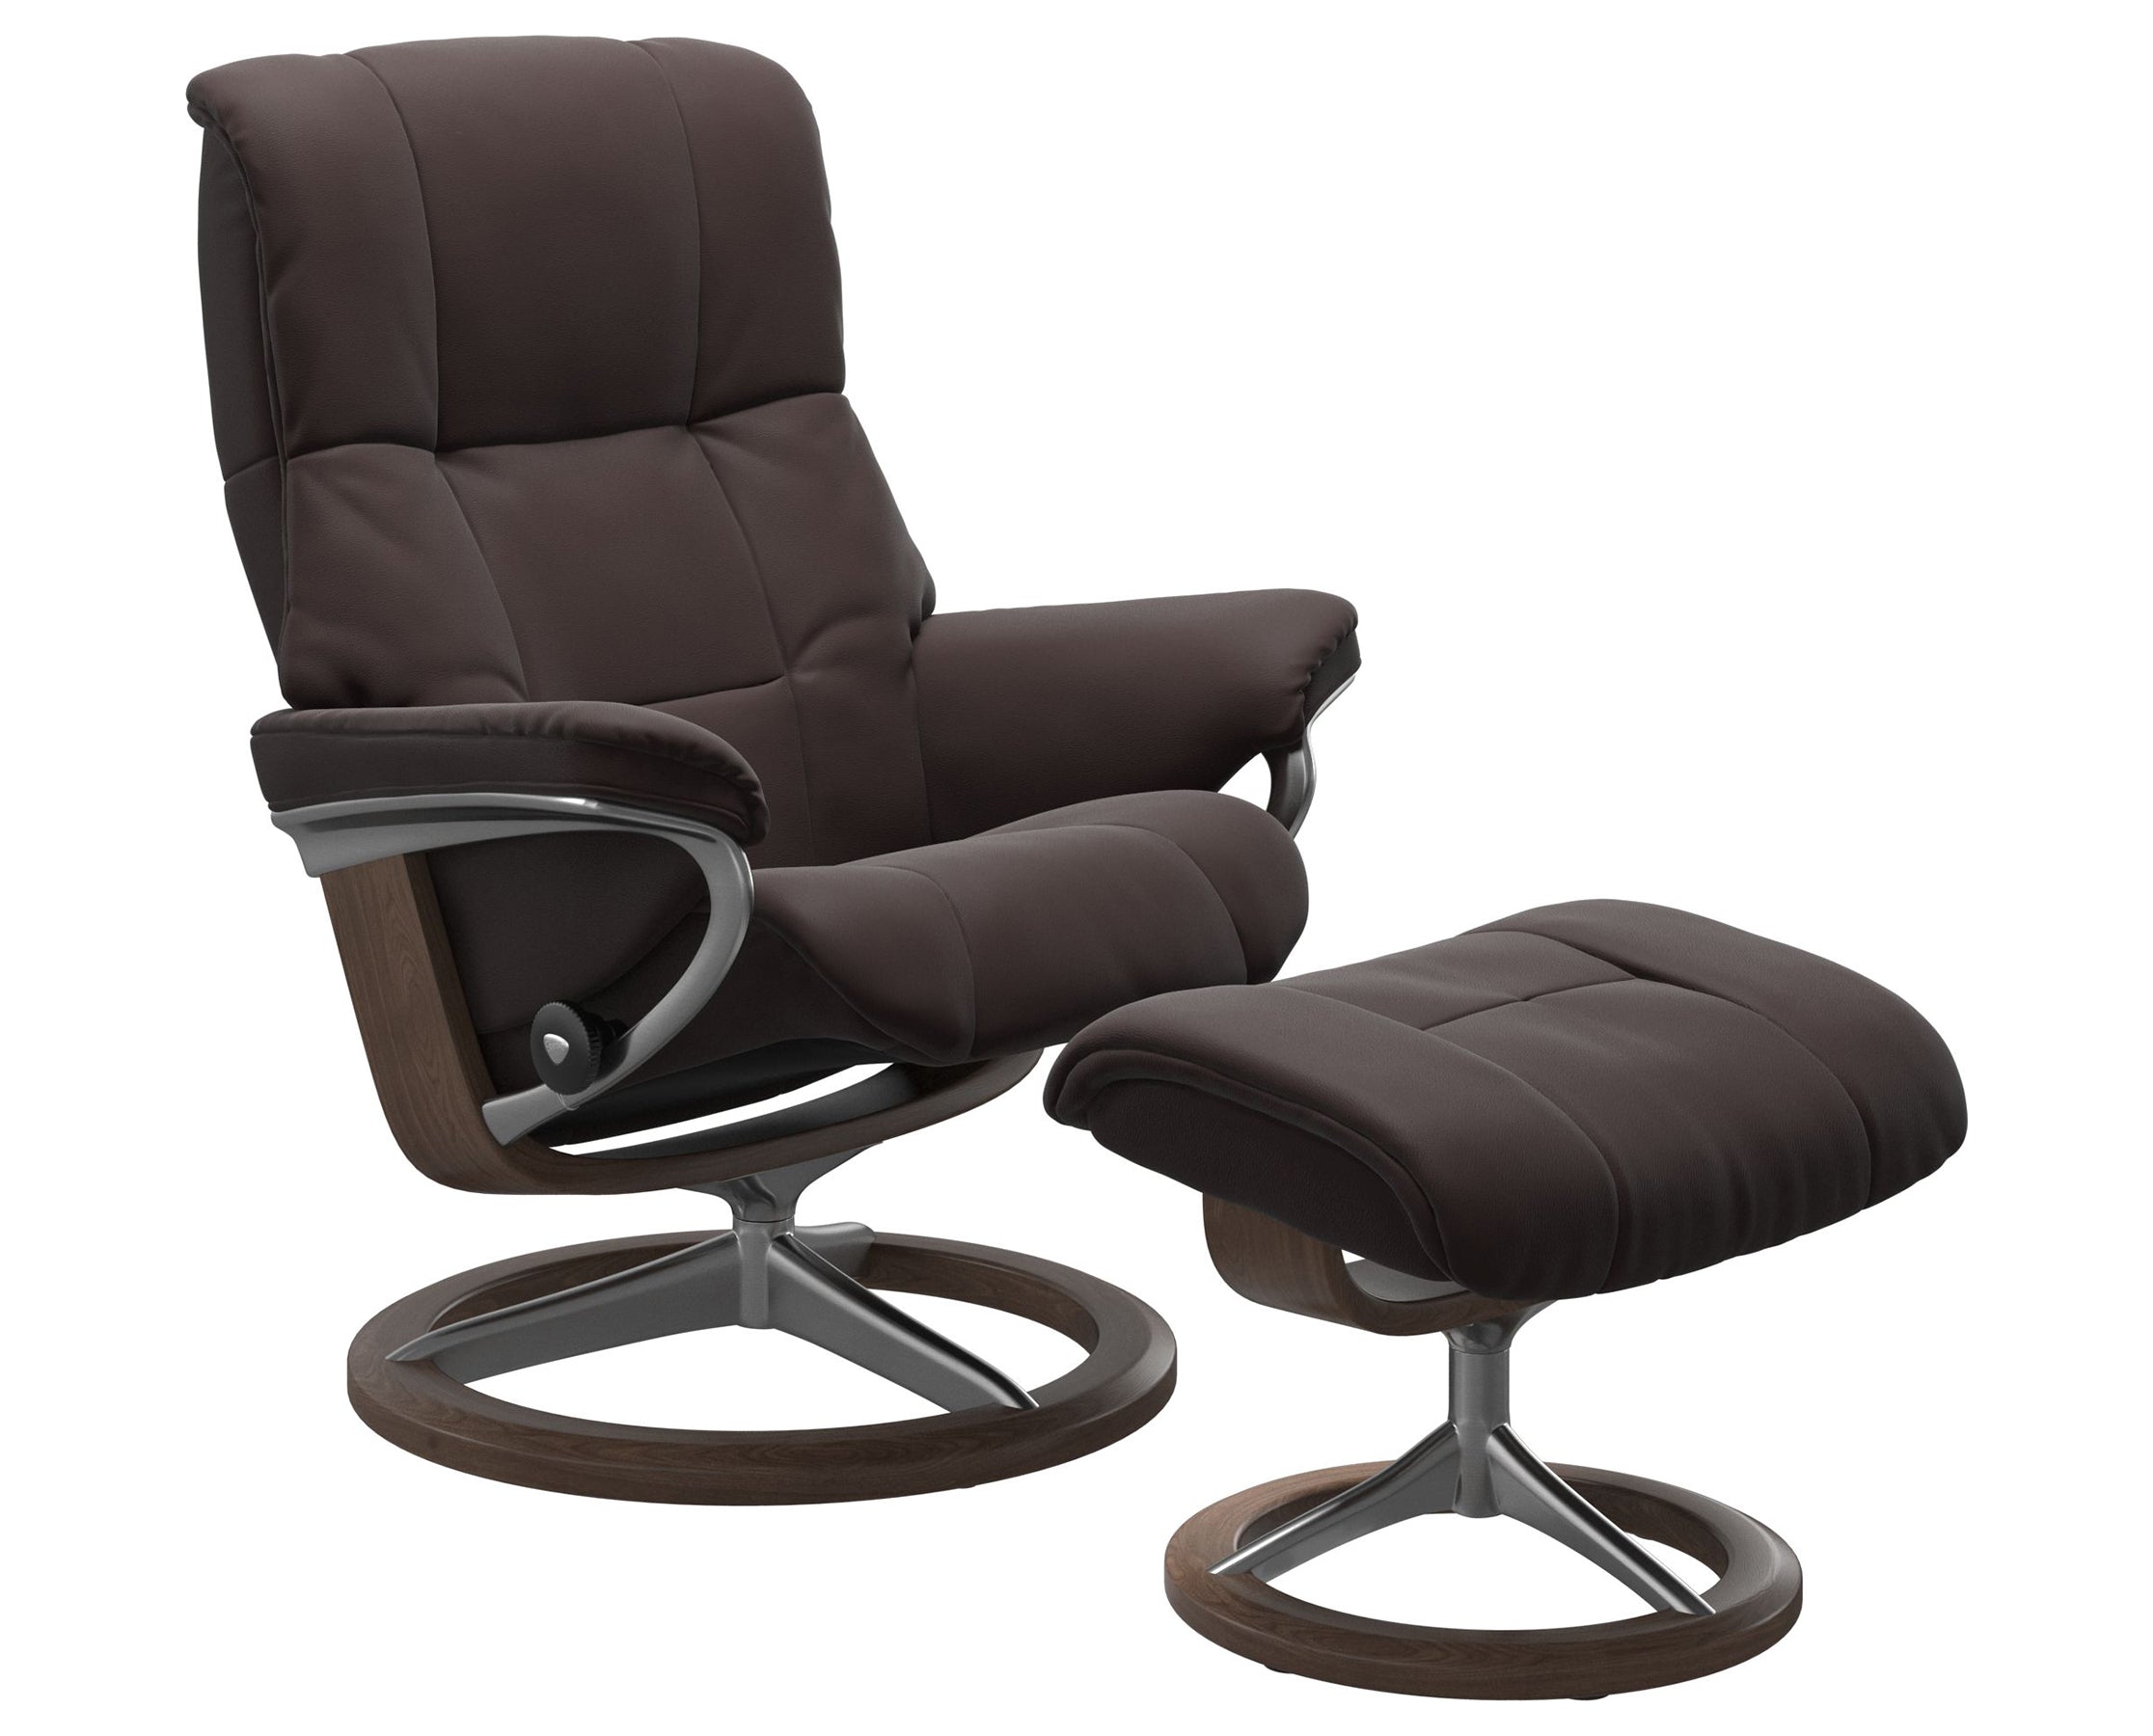 Paloma Leather Chocolate S/M/L and Walnut Base | Stressless Mayfair Signature Recliner | Valley Ridge Furniture